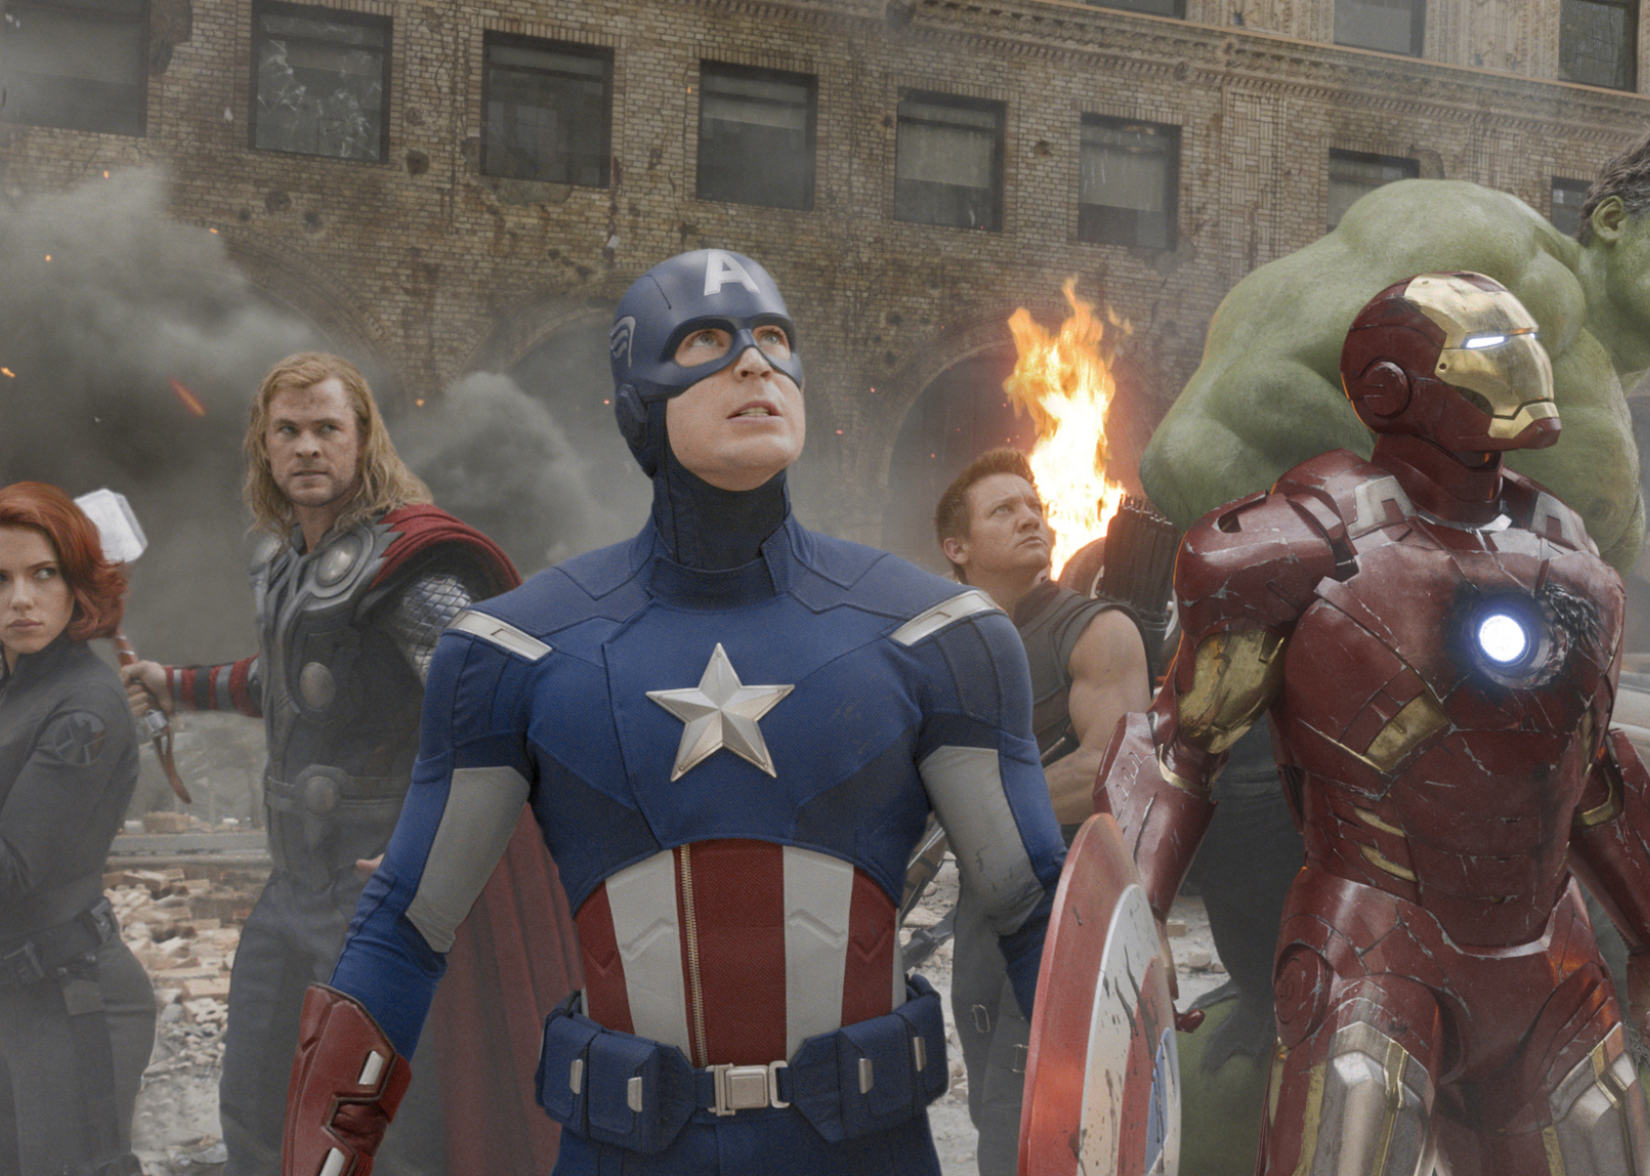 A scene with the full Avengers crew in action from 